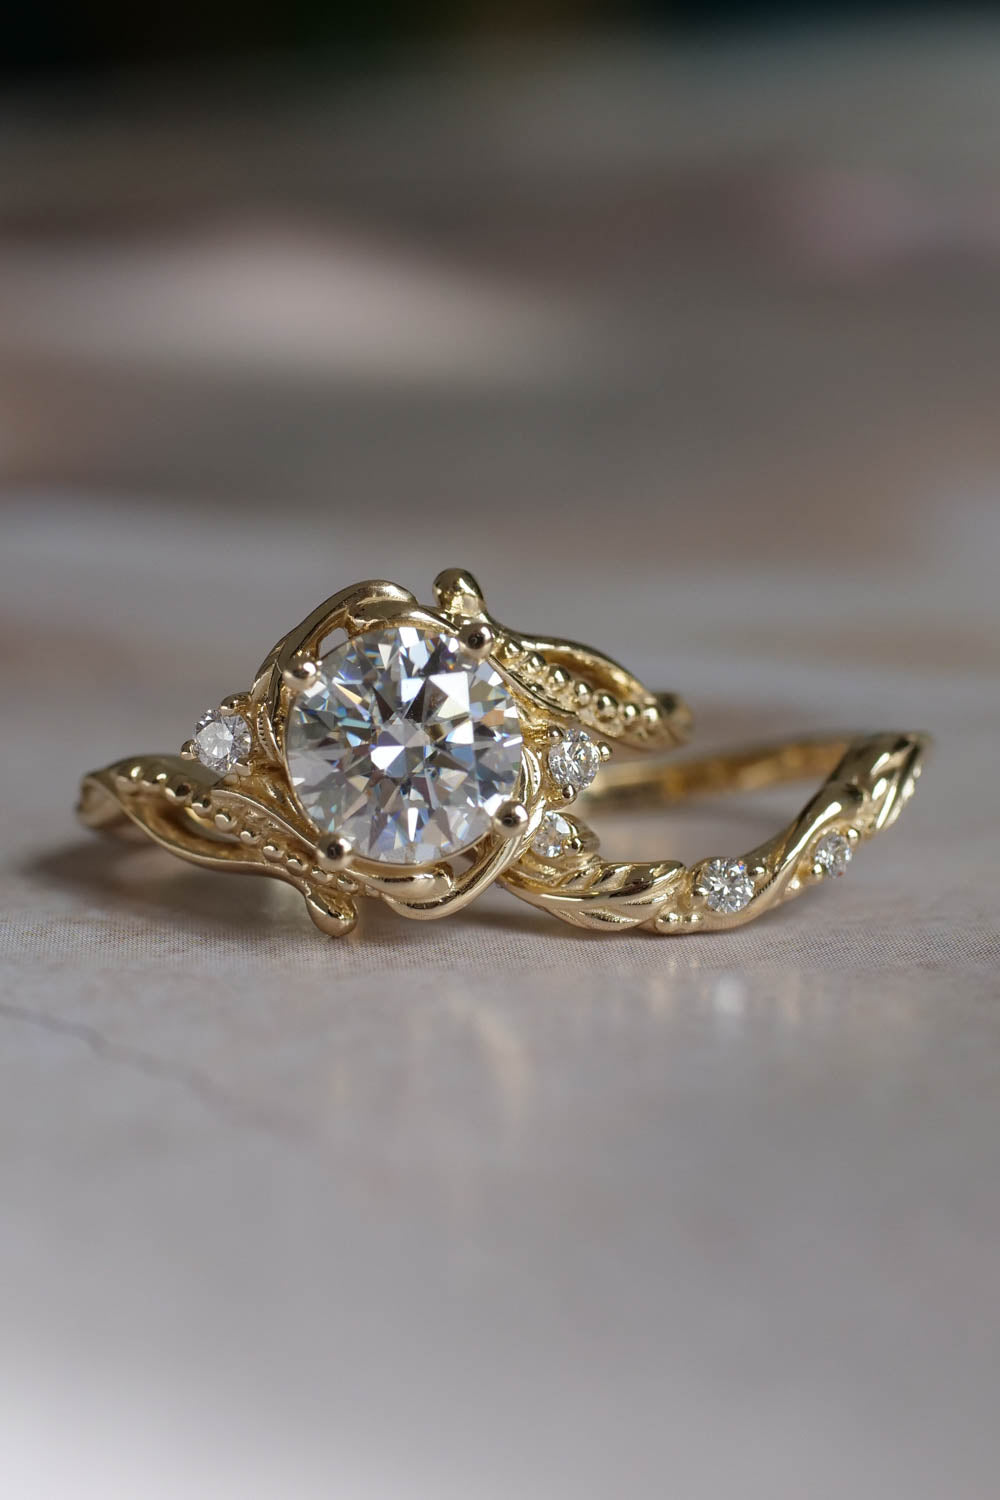 1 carat moissanite engagement ring  in yellow gold with small saide diamonds arround the ring